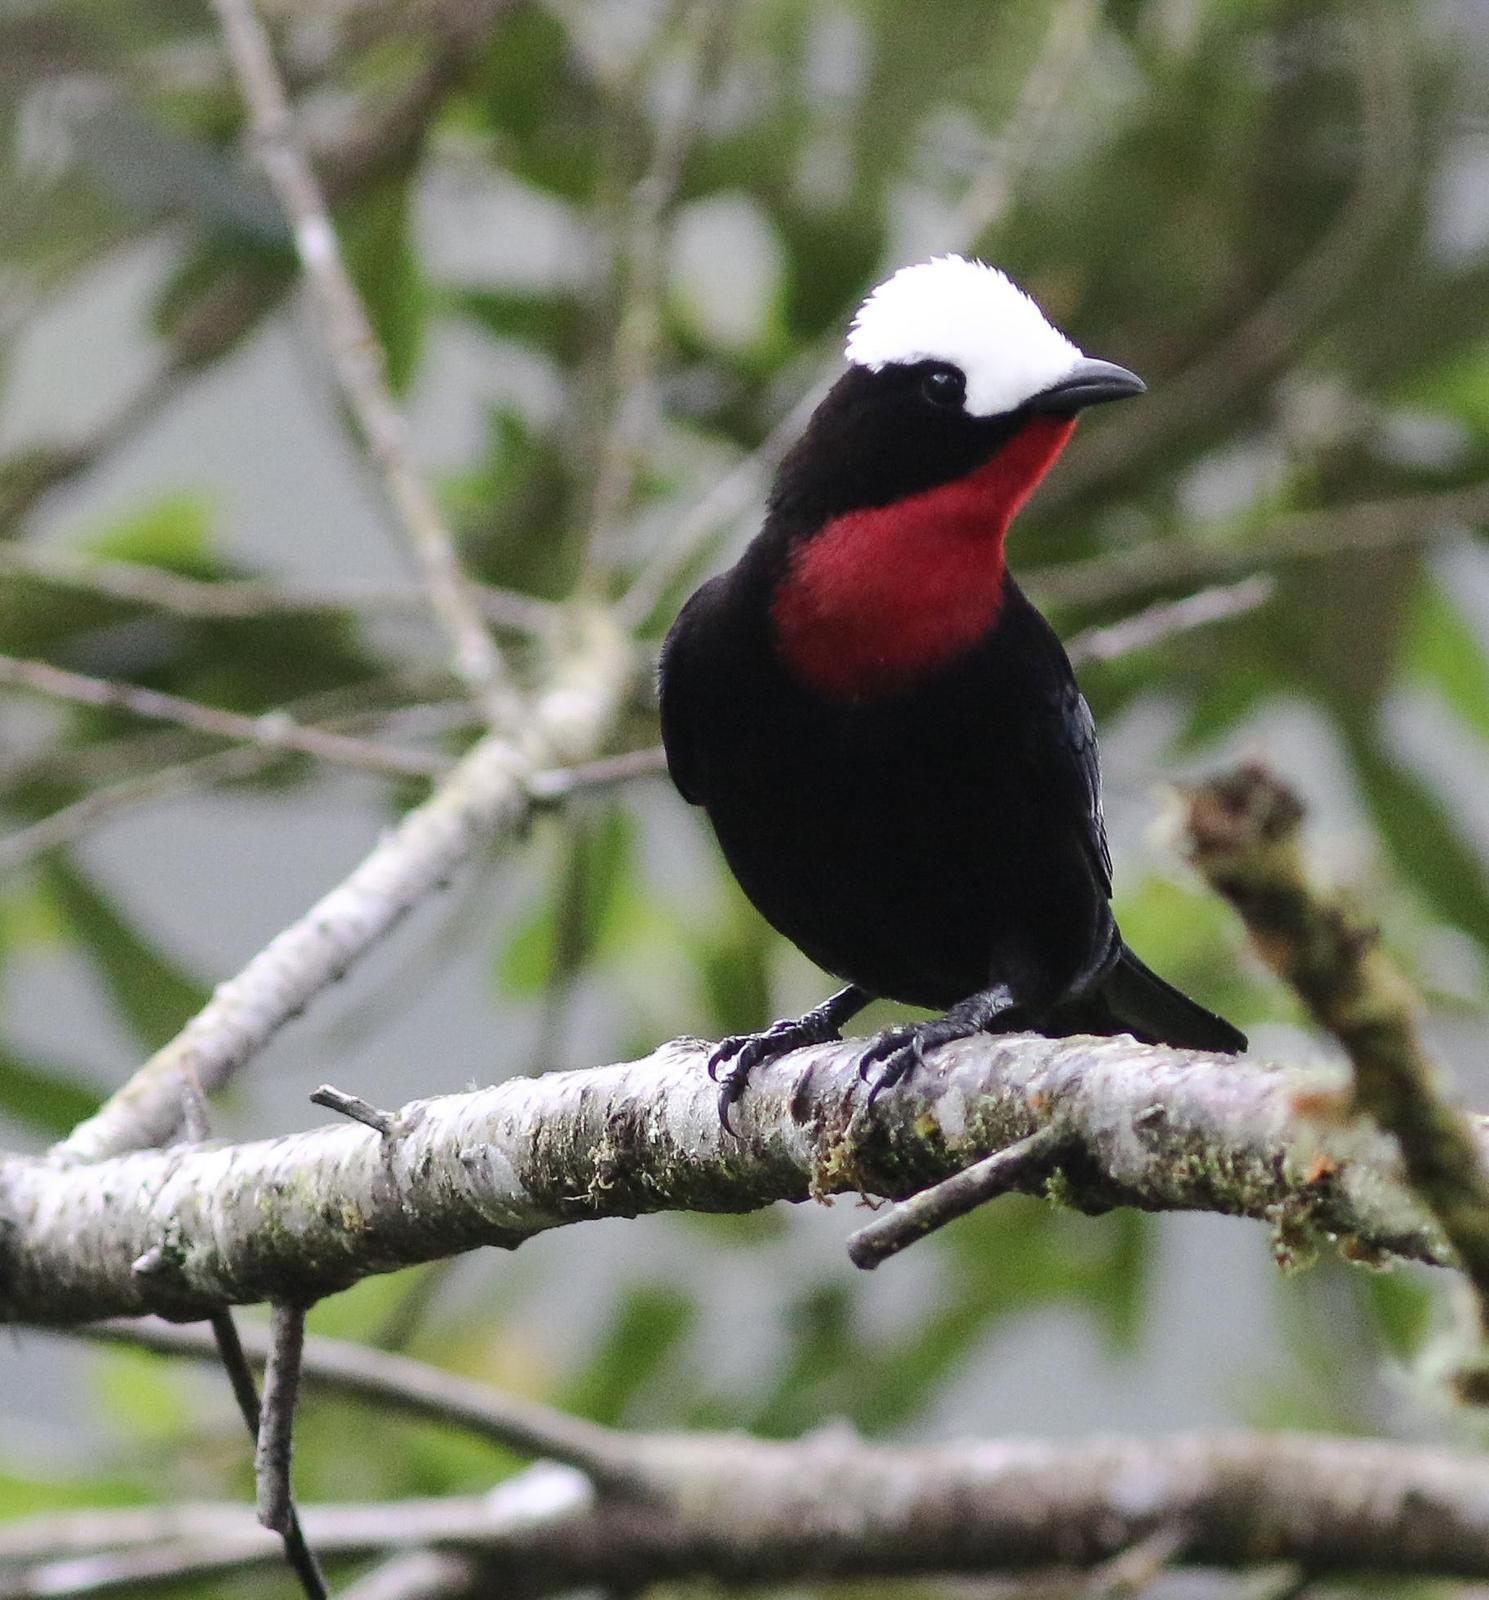 White-capped Tanager Photo by Leonardo Garrigues